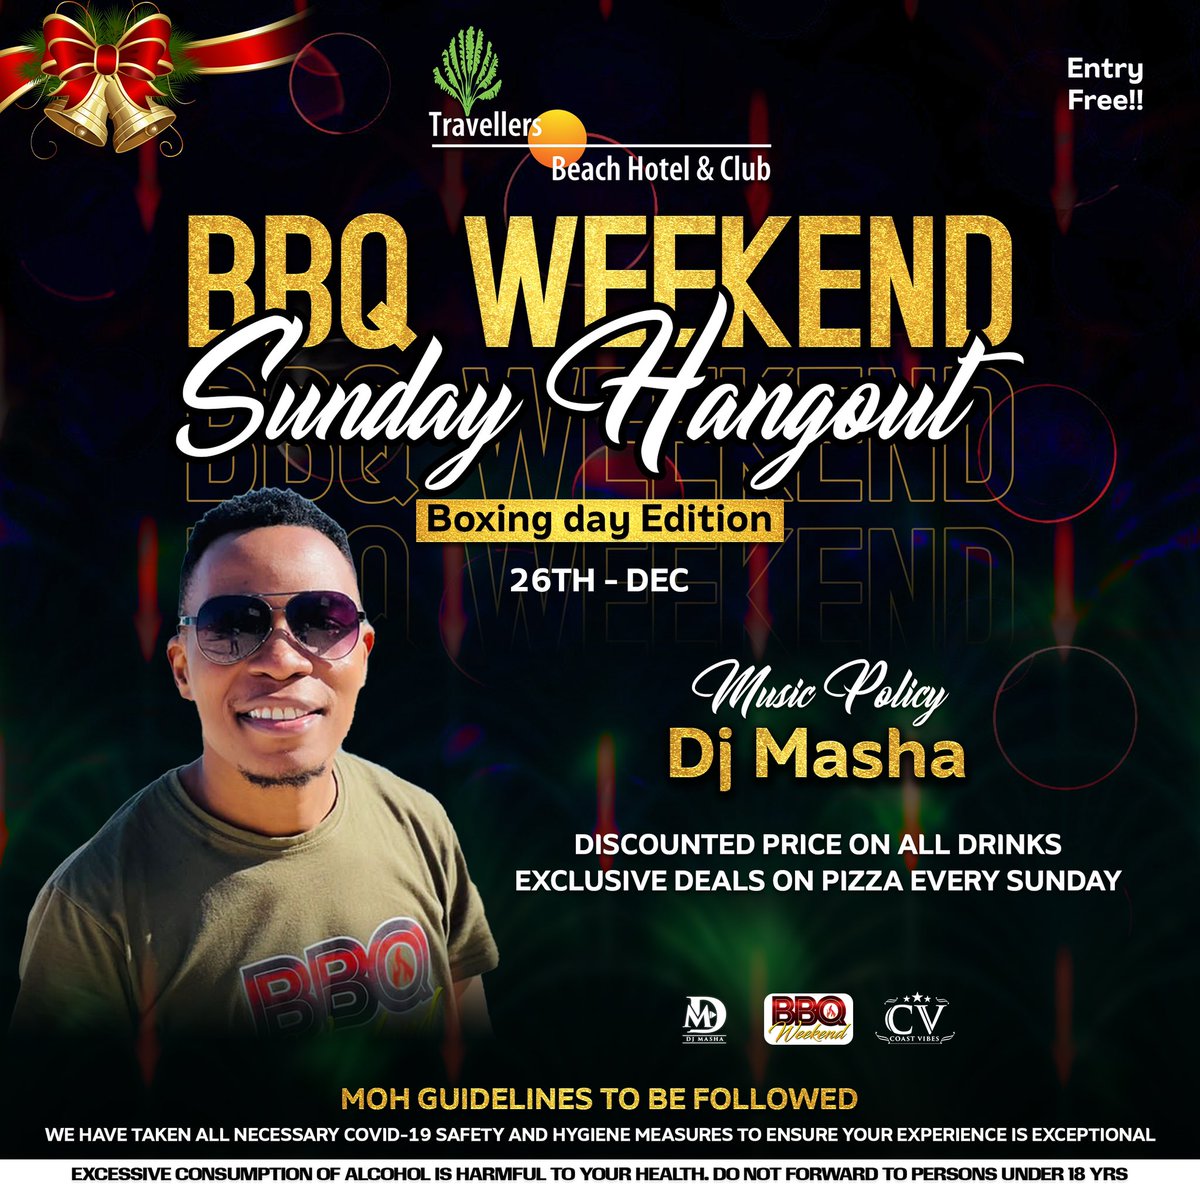 Boxing Day at the beachside. 🏝🏝Come through @travellersbhc and have an amazing Barbecue Experience. ♨️🍗 Entry is Free!! ⛱ #DjMashaLive #BoxingDay #LG100Club #MagicalKenya #TembeaKenya #Mombasa #HappyHolidays